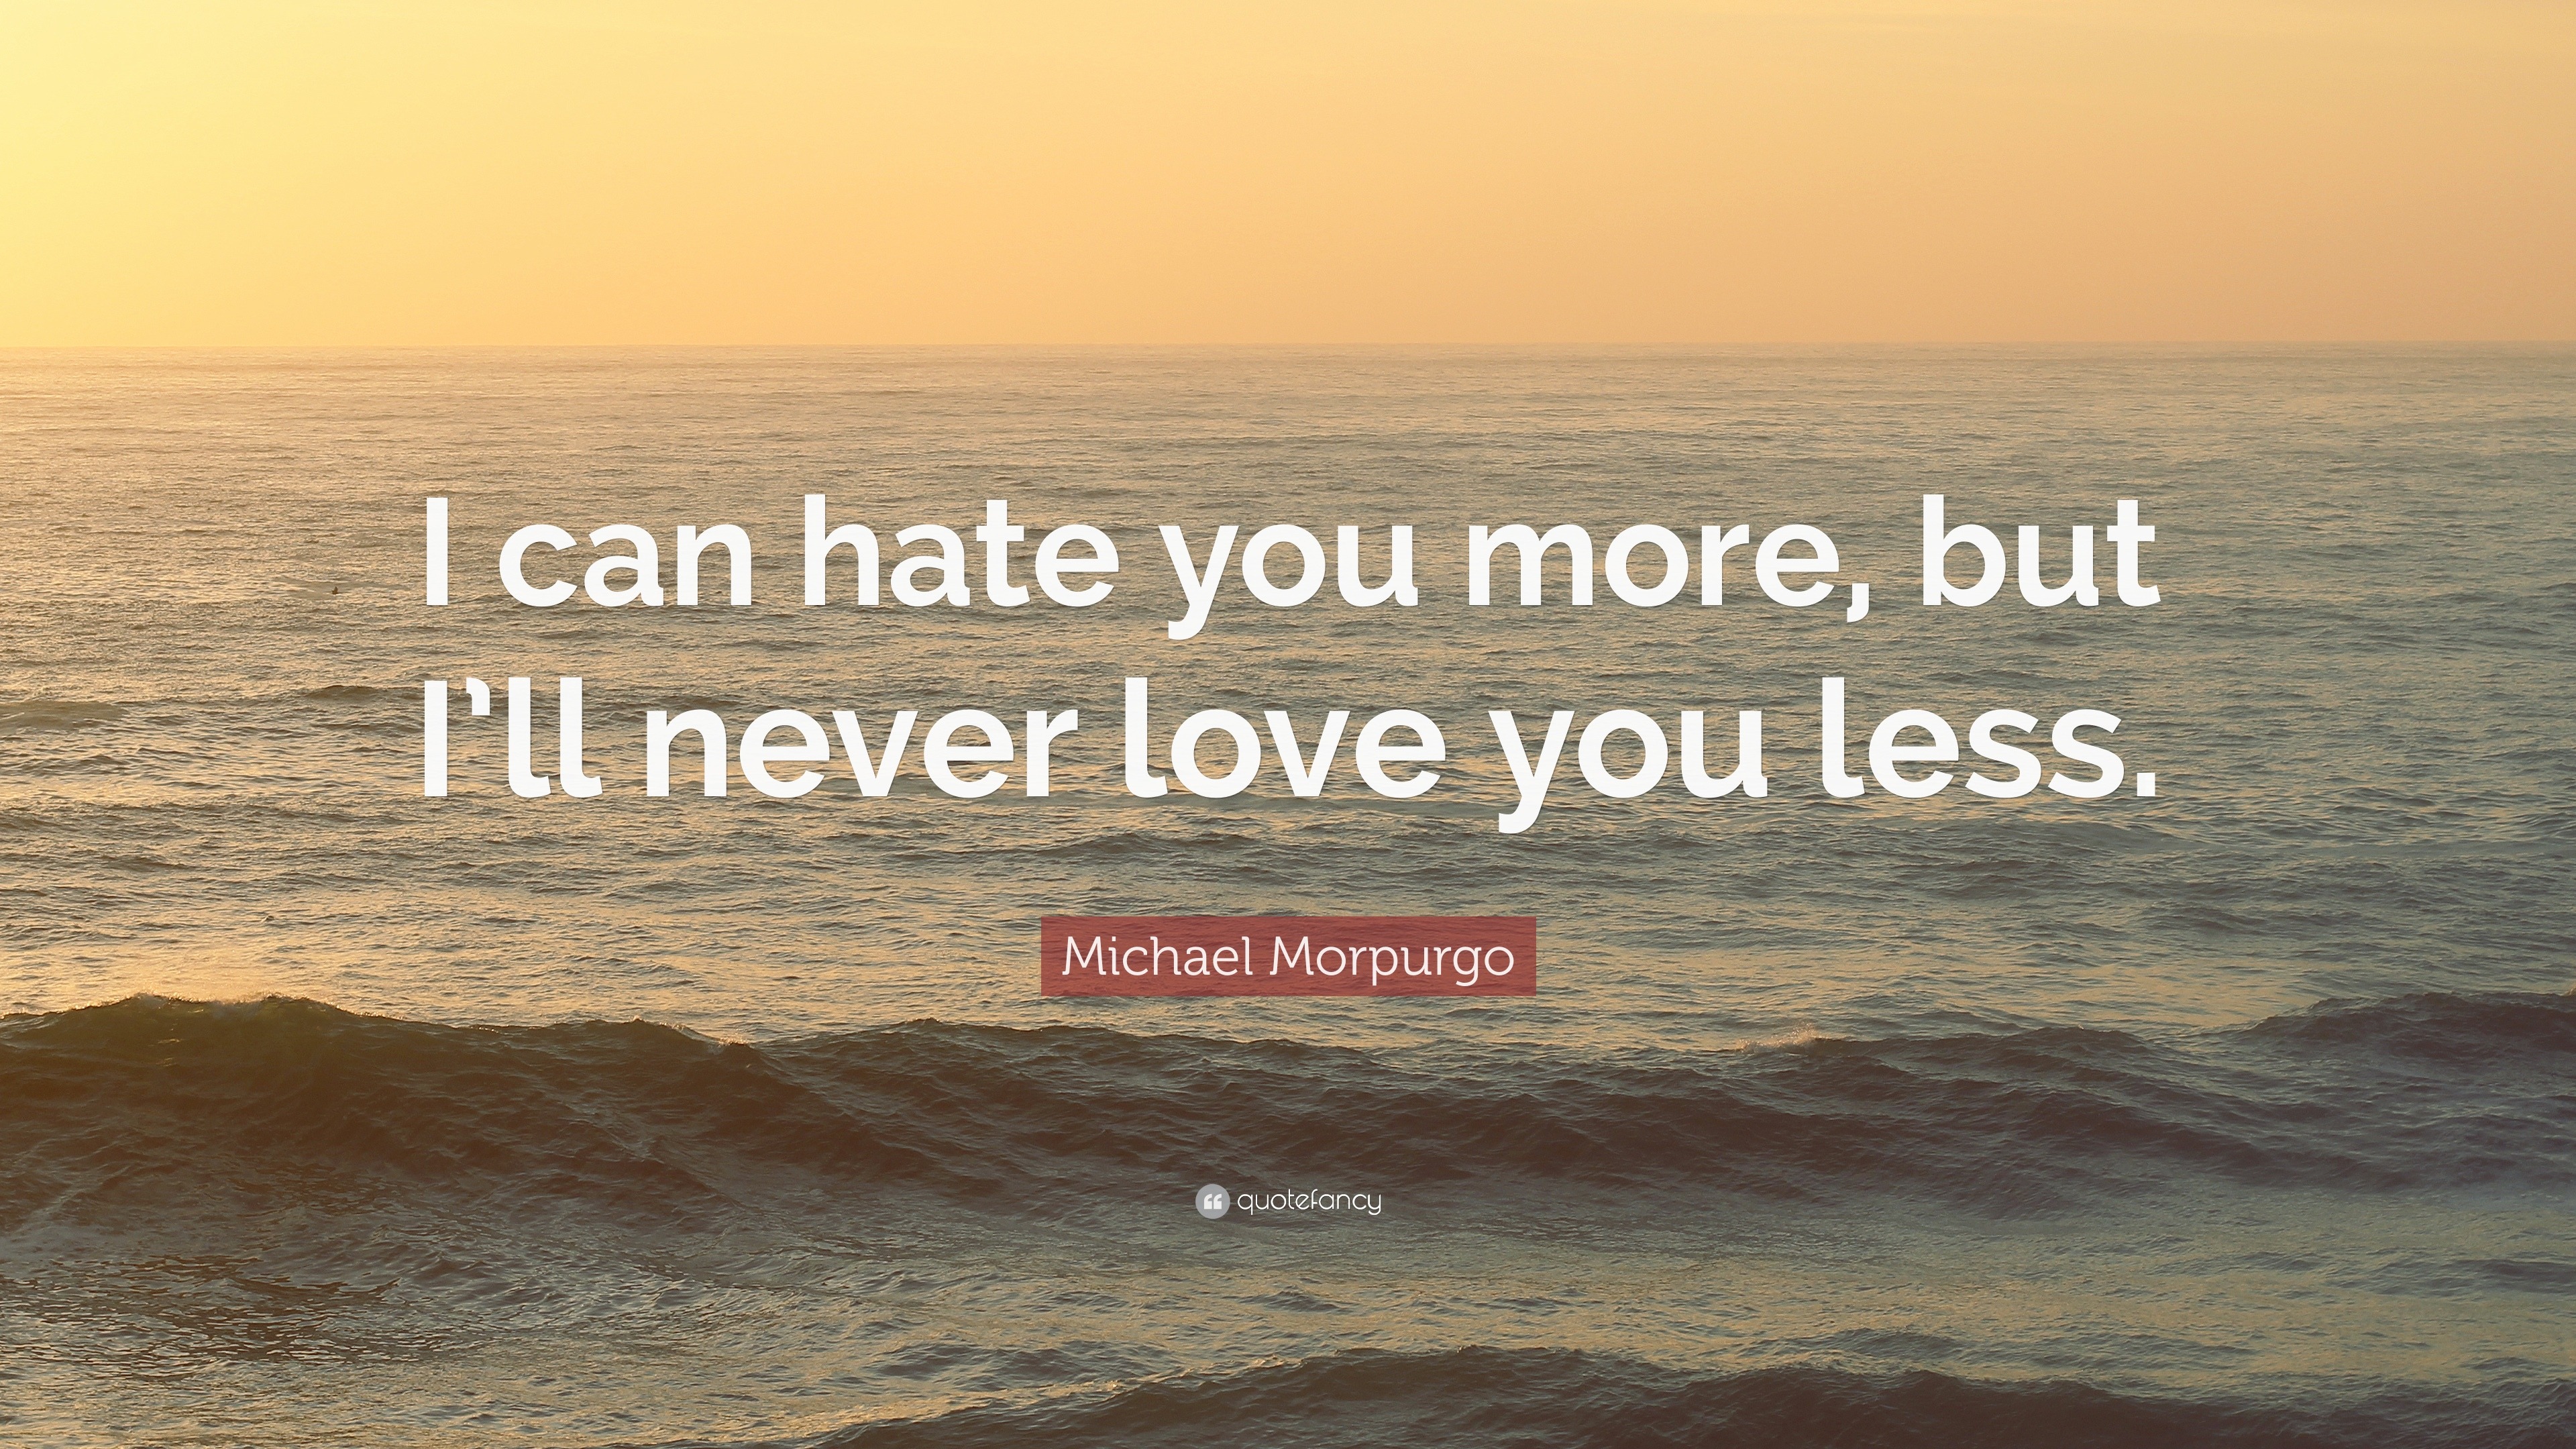 Michael Morpurgo Quote “I can hate you more but I ll never